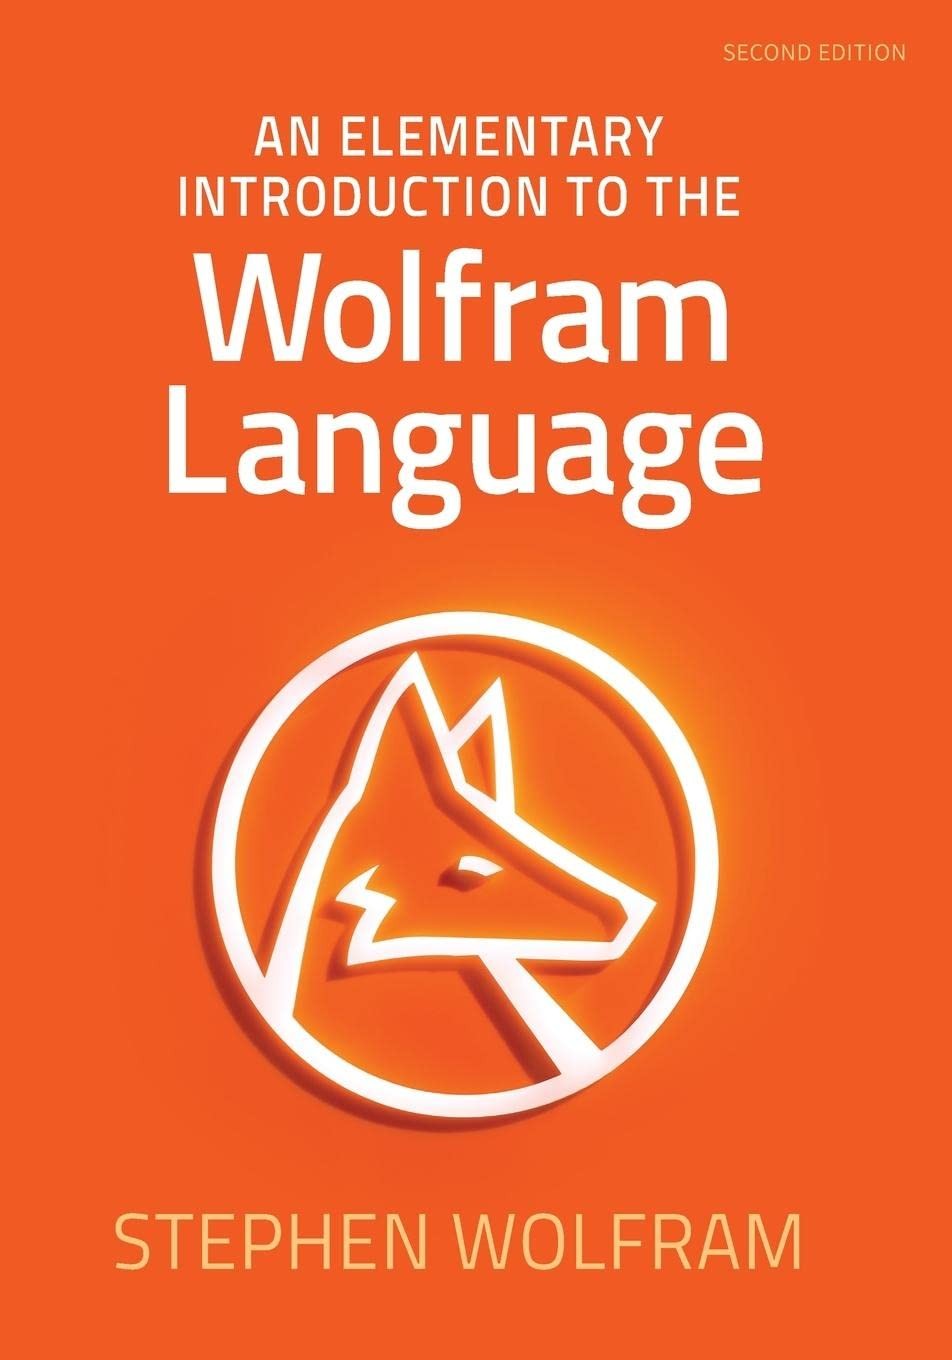 An Elementary Introduction to the Wolfram Language - Second Edition